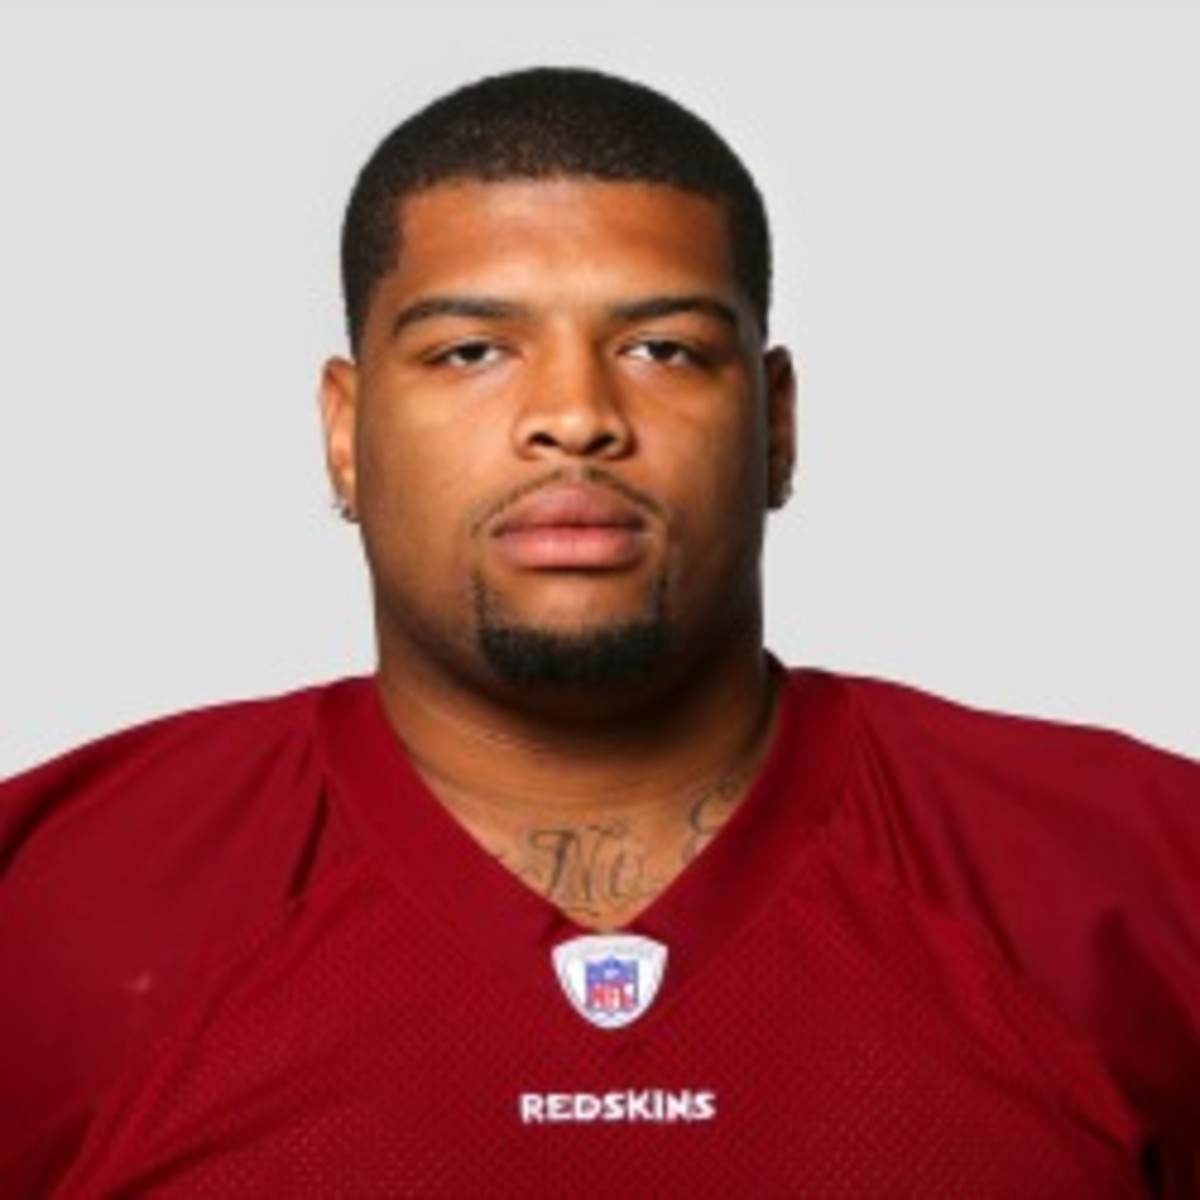 Redskins tackle Trent Williams was reportedly tasered and struck in the head by a champagne bottle at a Honolulu night club. (Getty Images)